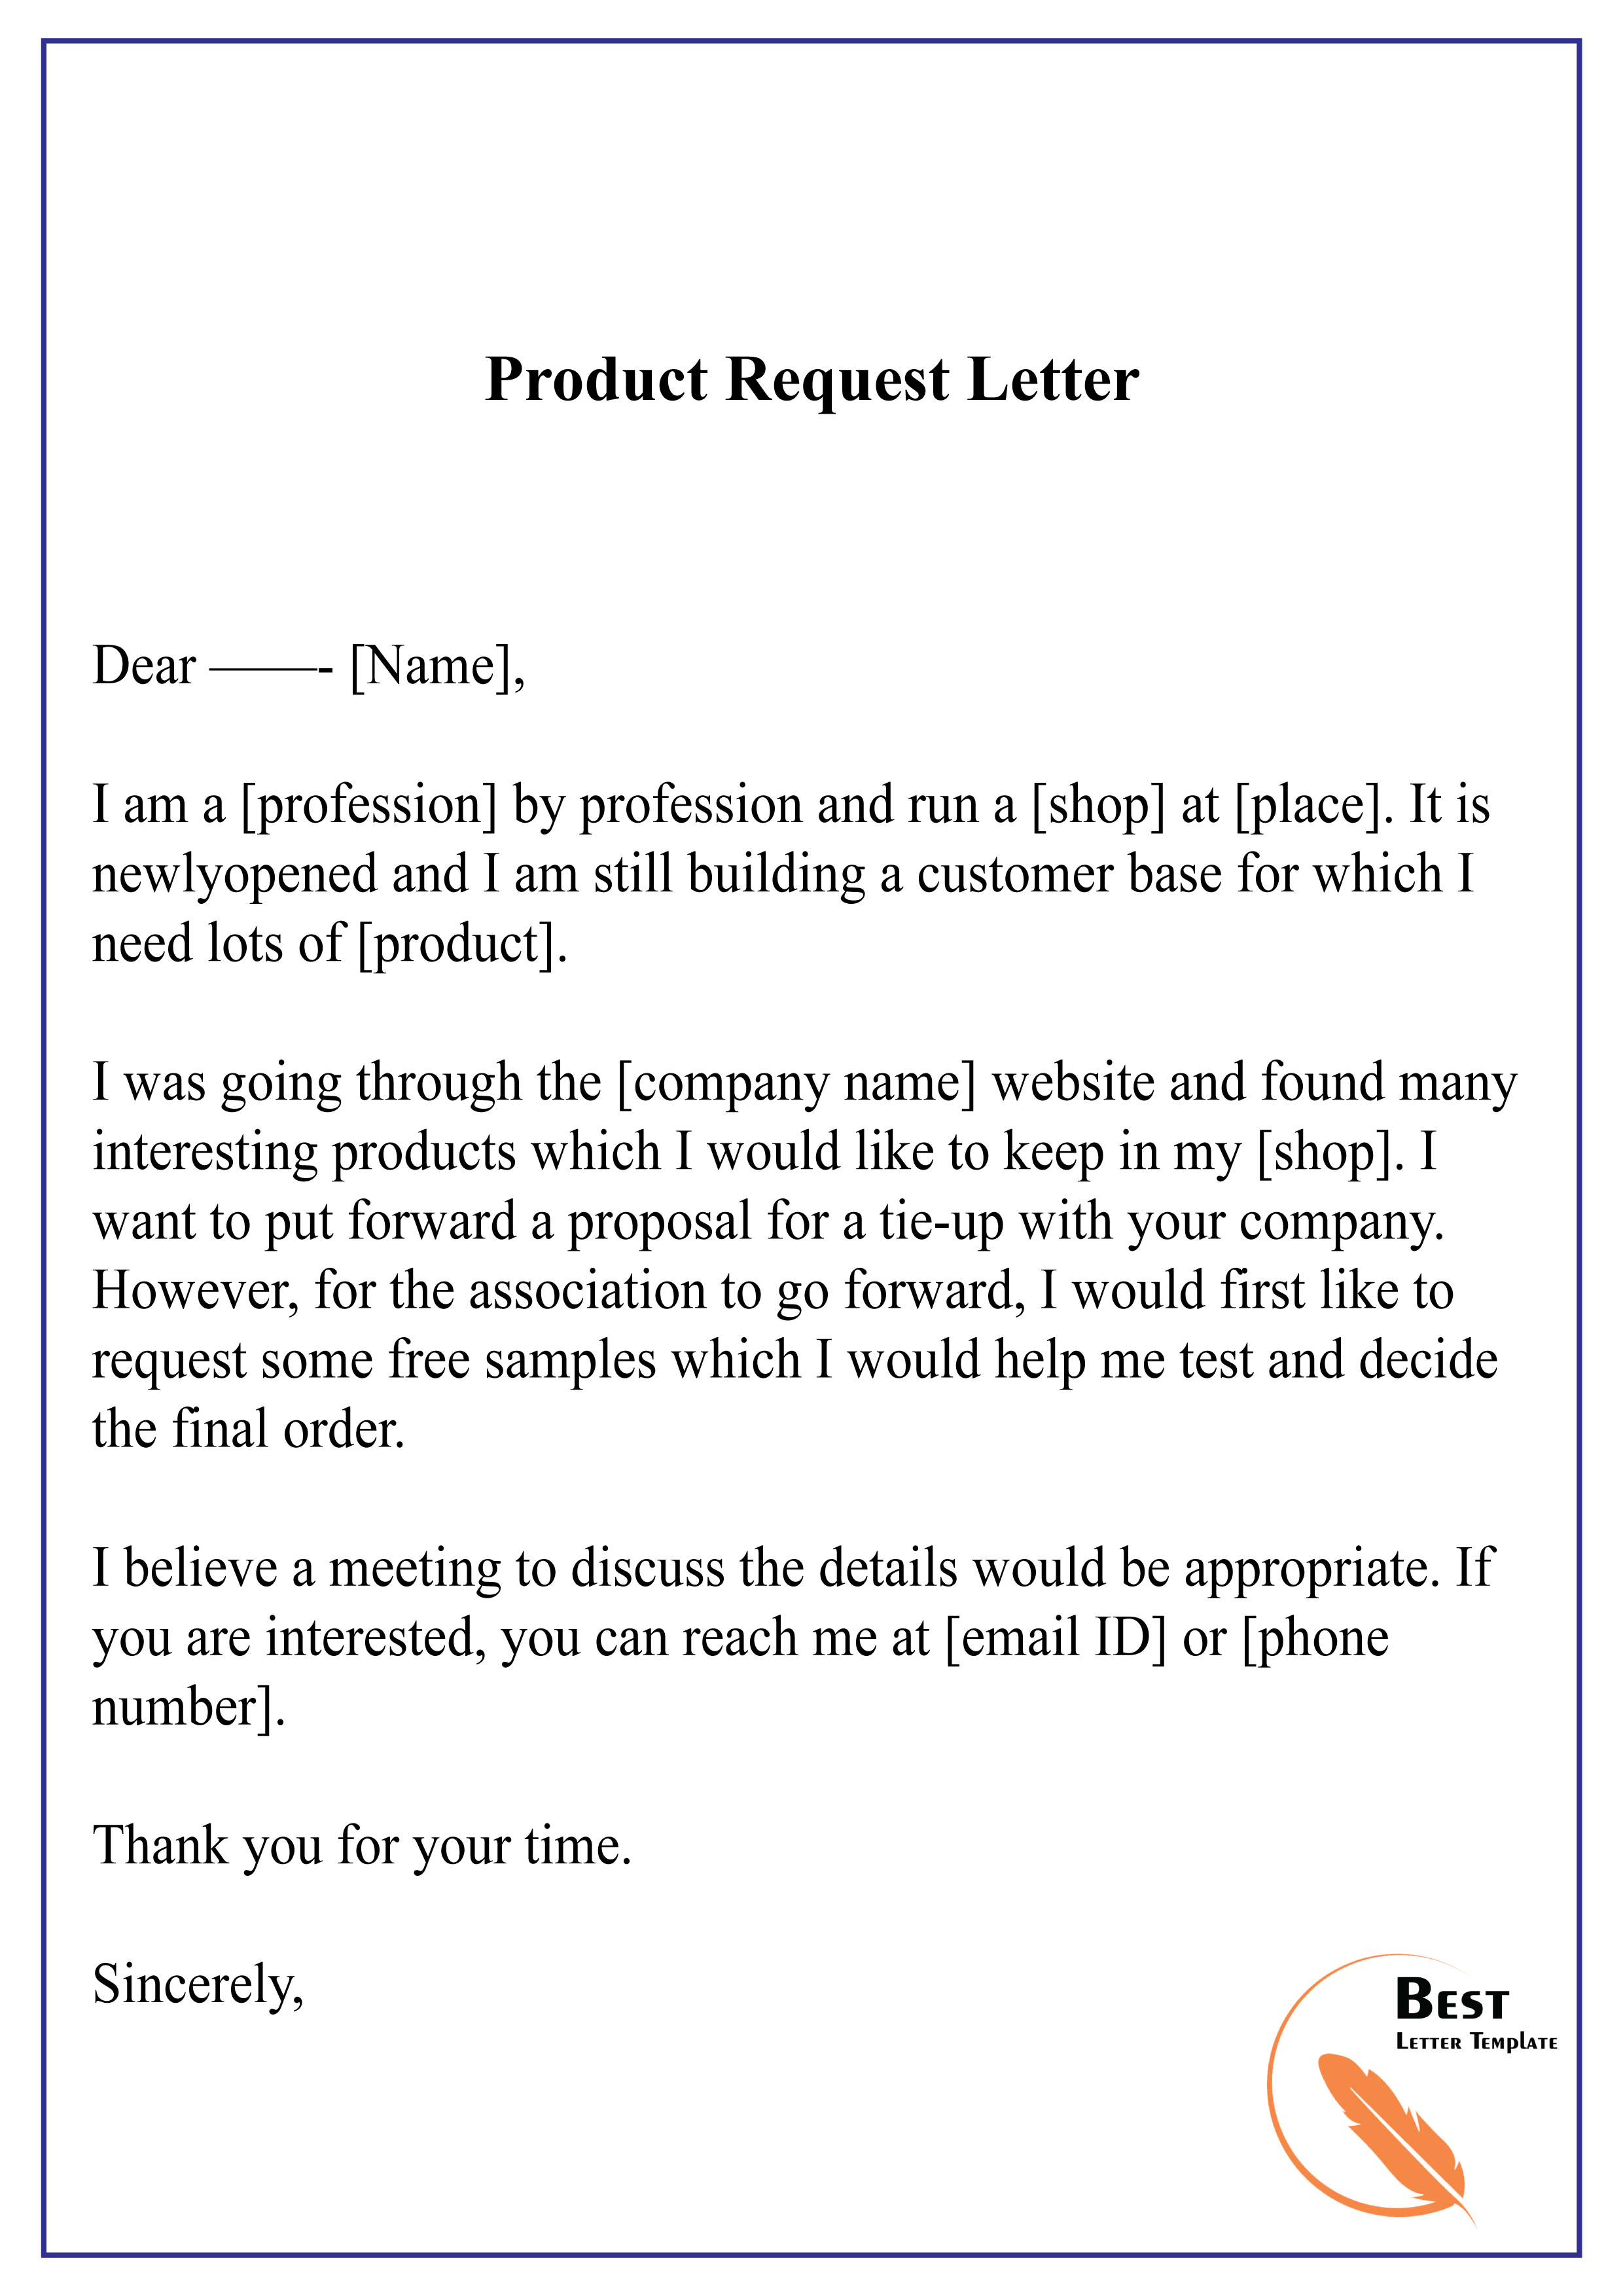 Product Sample Request Letter